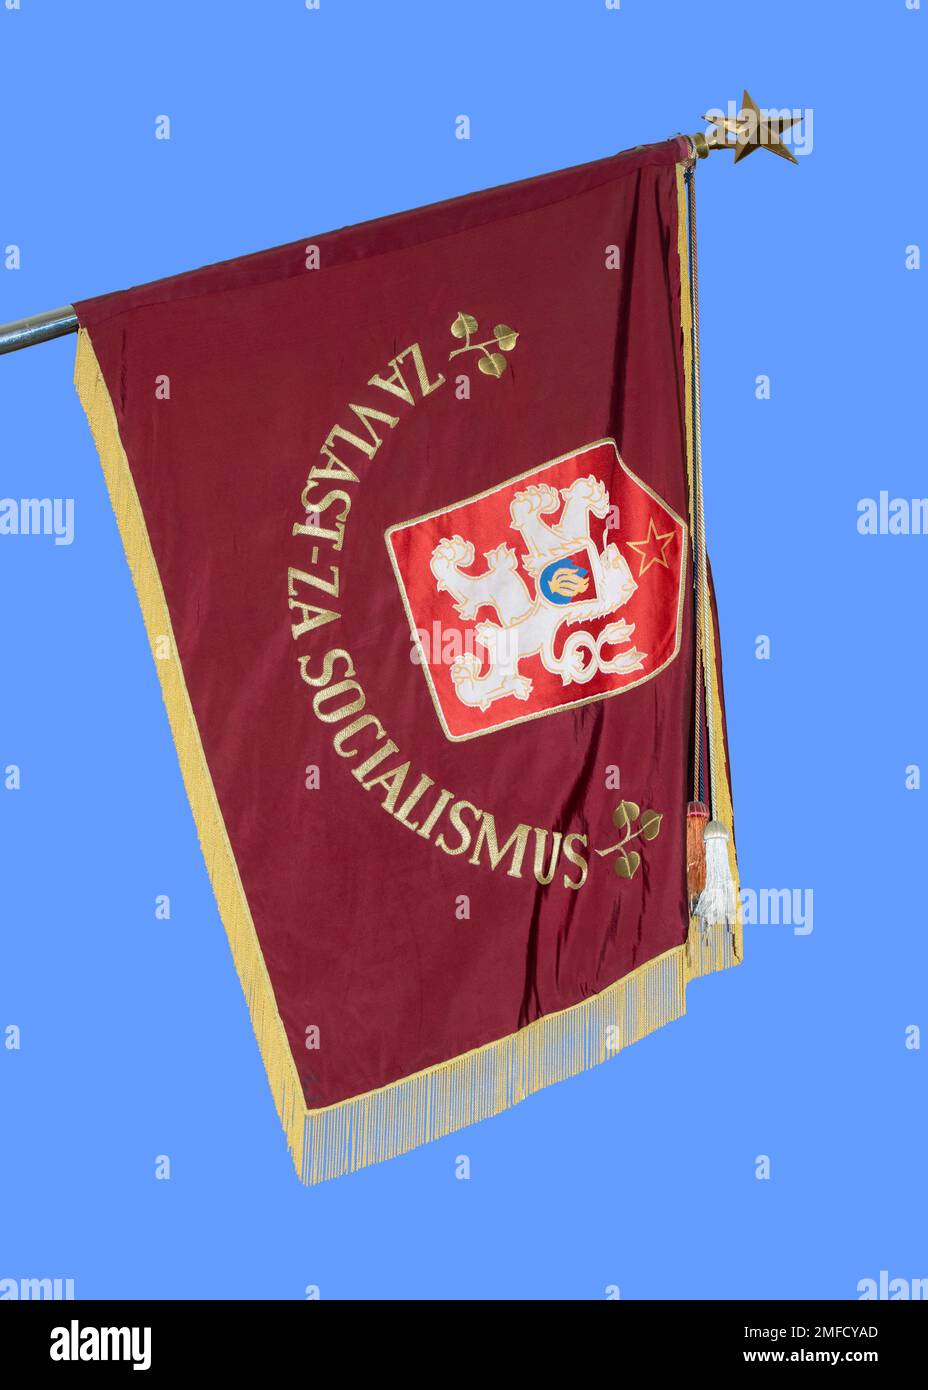 Historical flag of the armed forces of the Czechoslovak Republic with the text - For the Motherland, For Socialism. Czech Republic Stock Photo